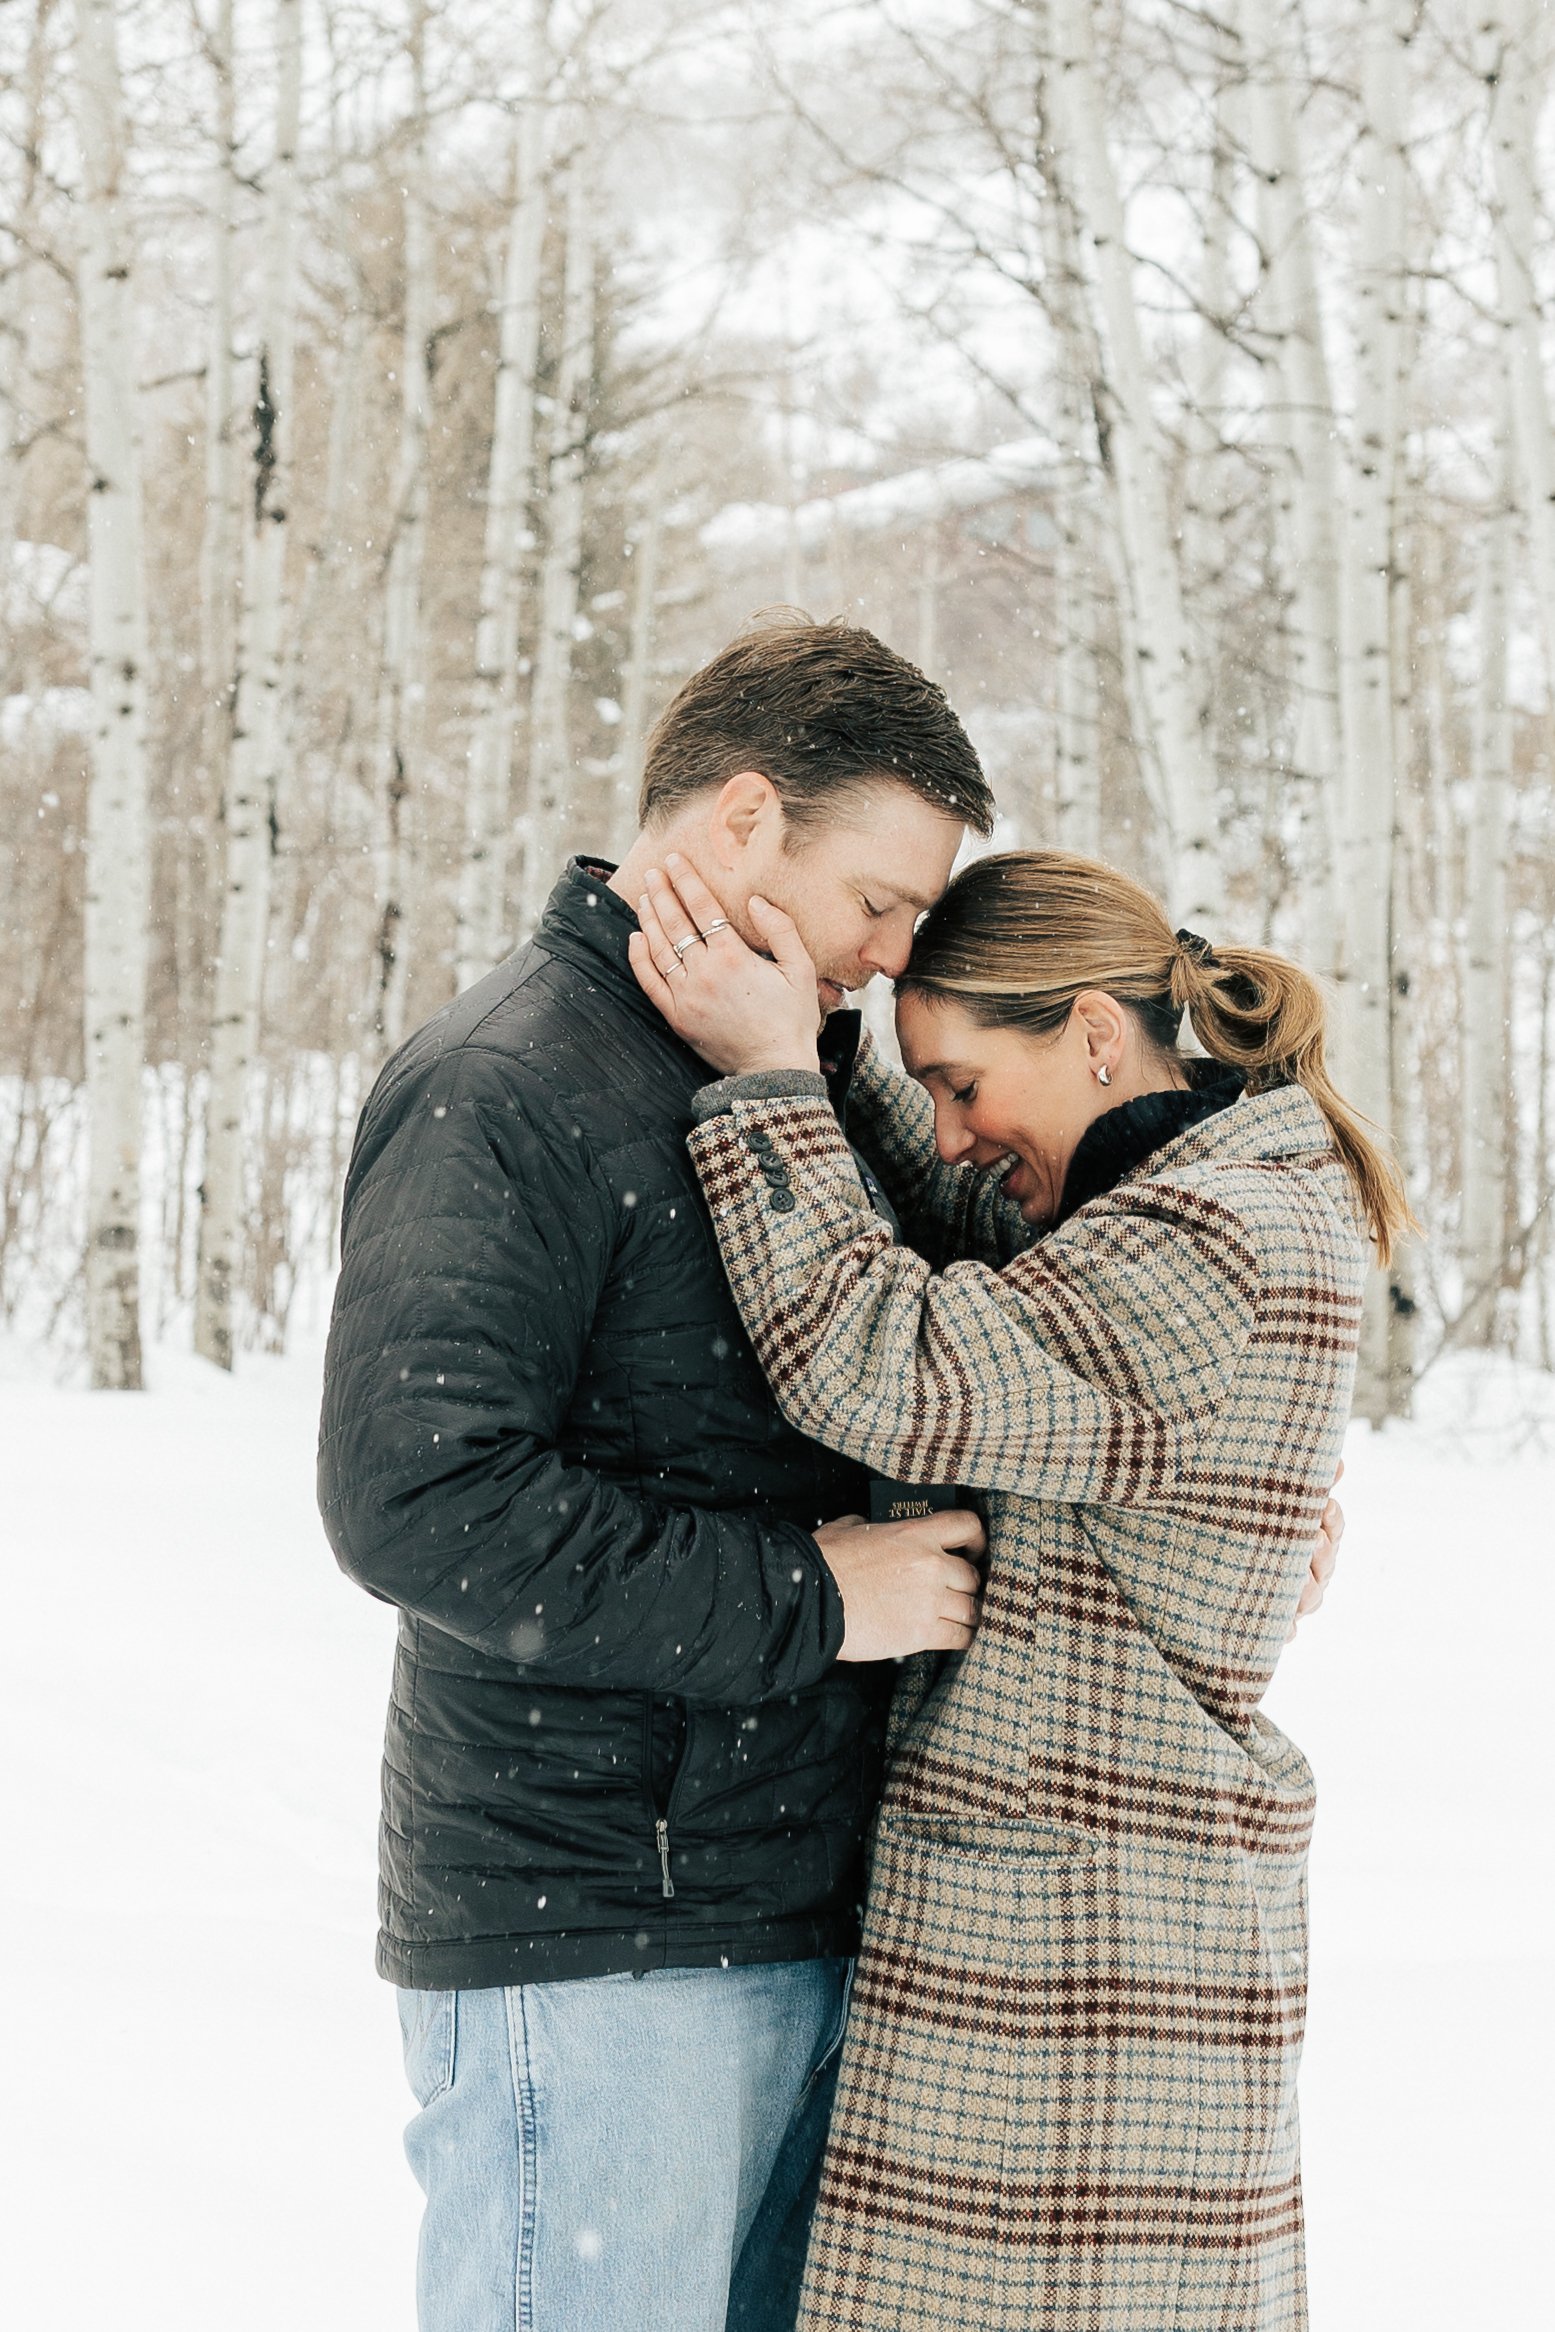  Newly engaged couple hug after surprise proposal. Winter engagement session in Park City, Utah. Boyfriend surprises girlfriend with wedding proposal during a snowy photoshoot. Man proposes to girlfriend. #parkcity #engagements #engagementsessionn #p